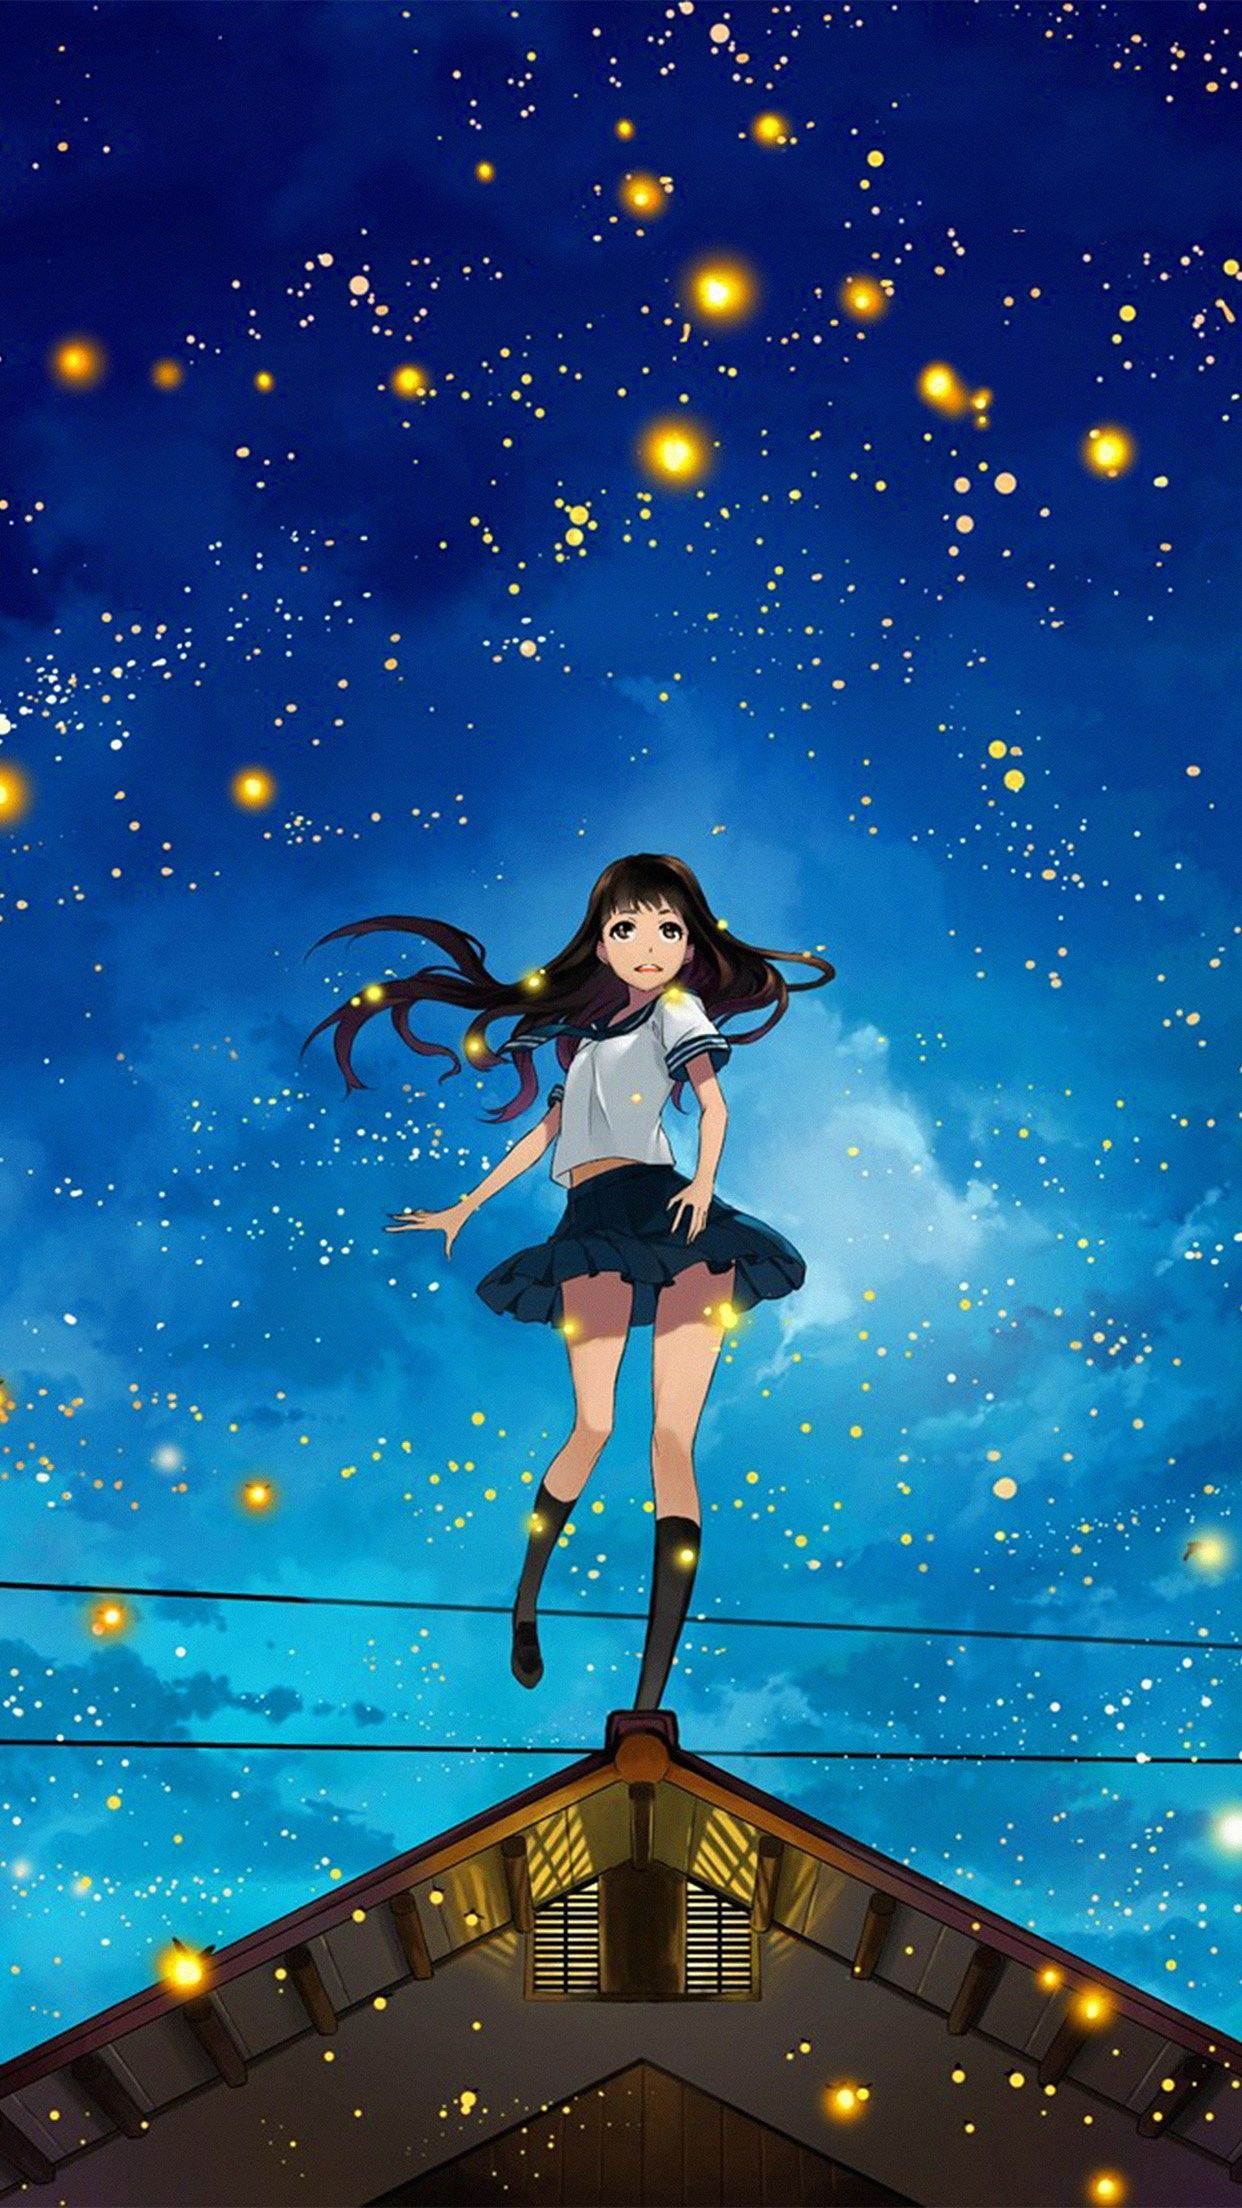 Anime girl with stars in the sky - Blue anime